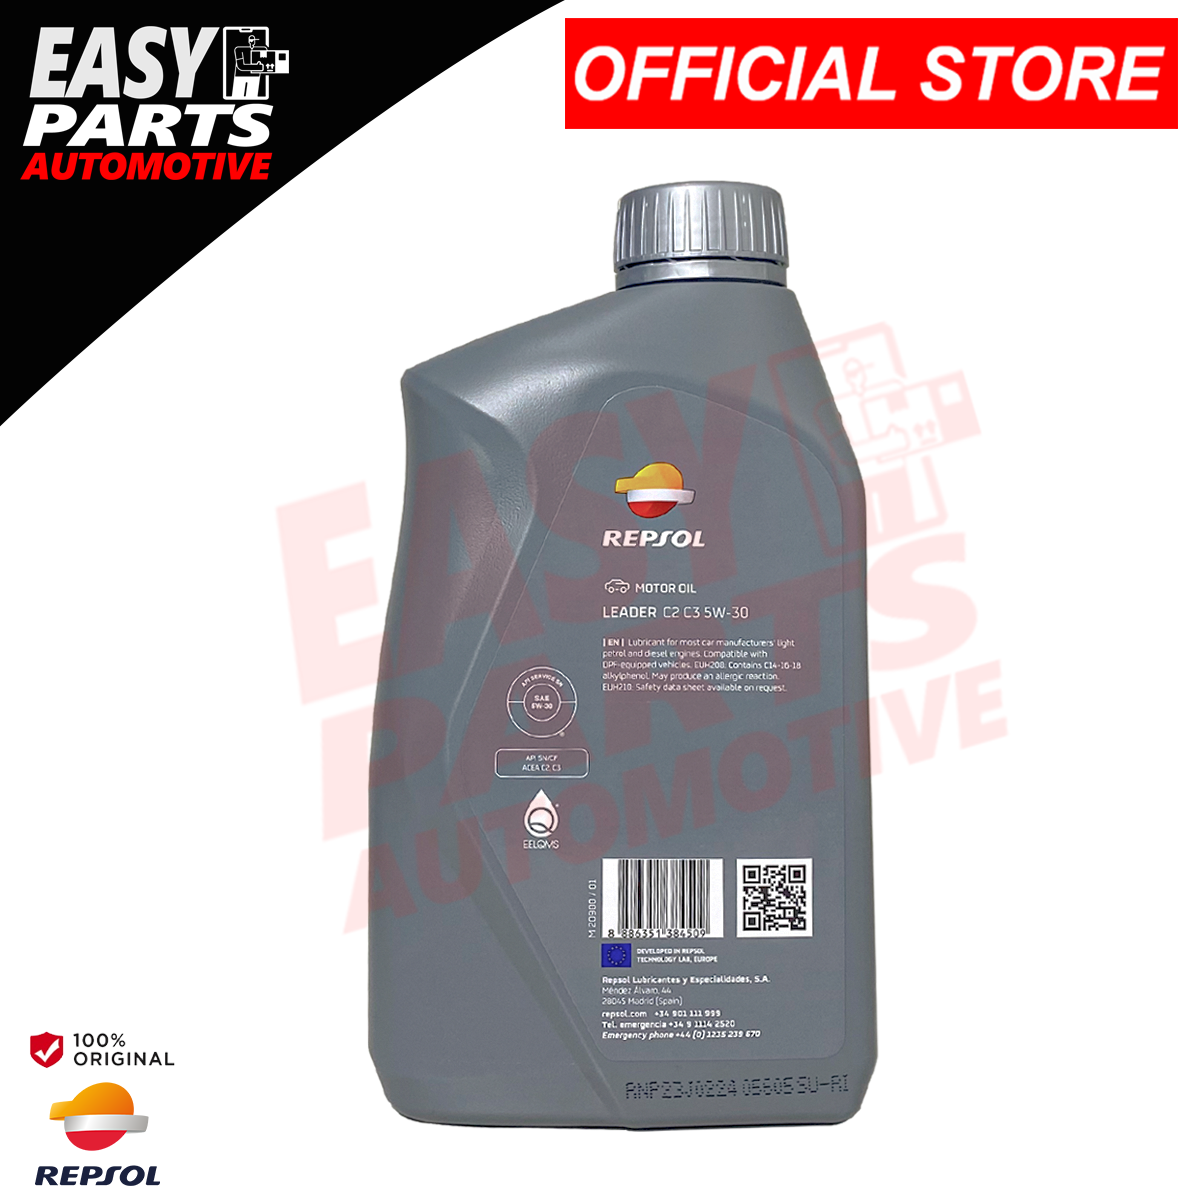 Repsol LEADER C2/C3 5W-30 Synthetic Motor Oil 5 Liters